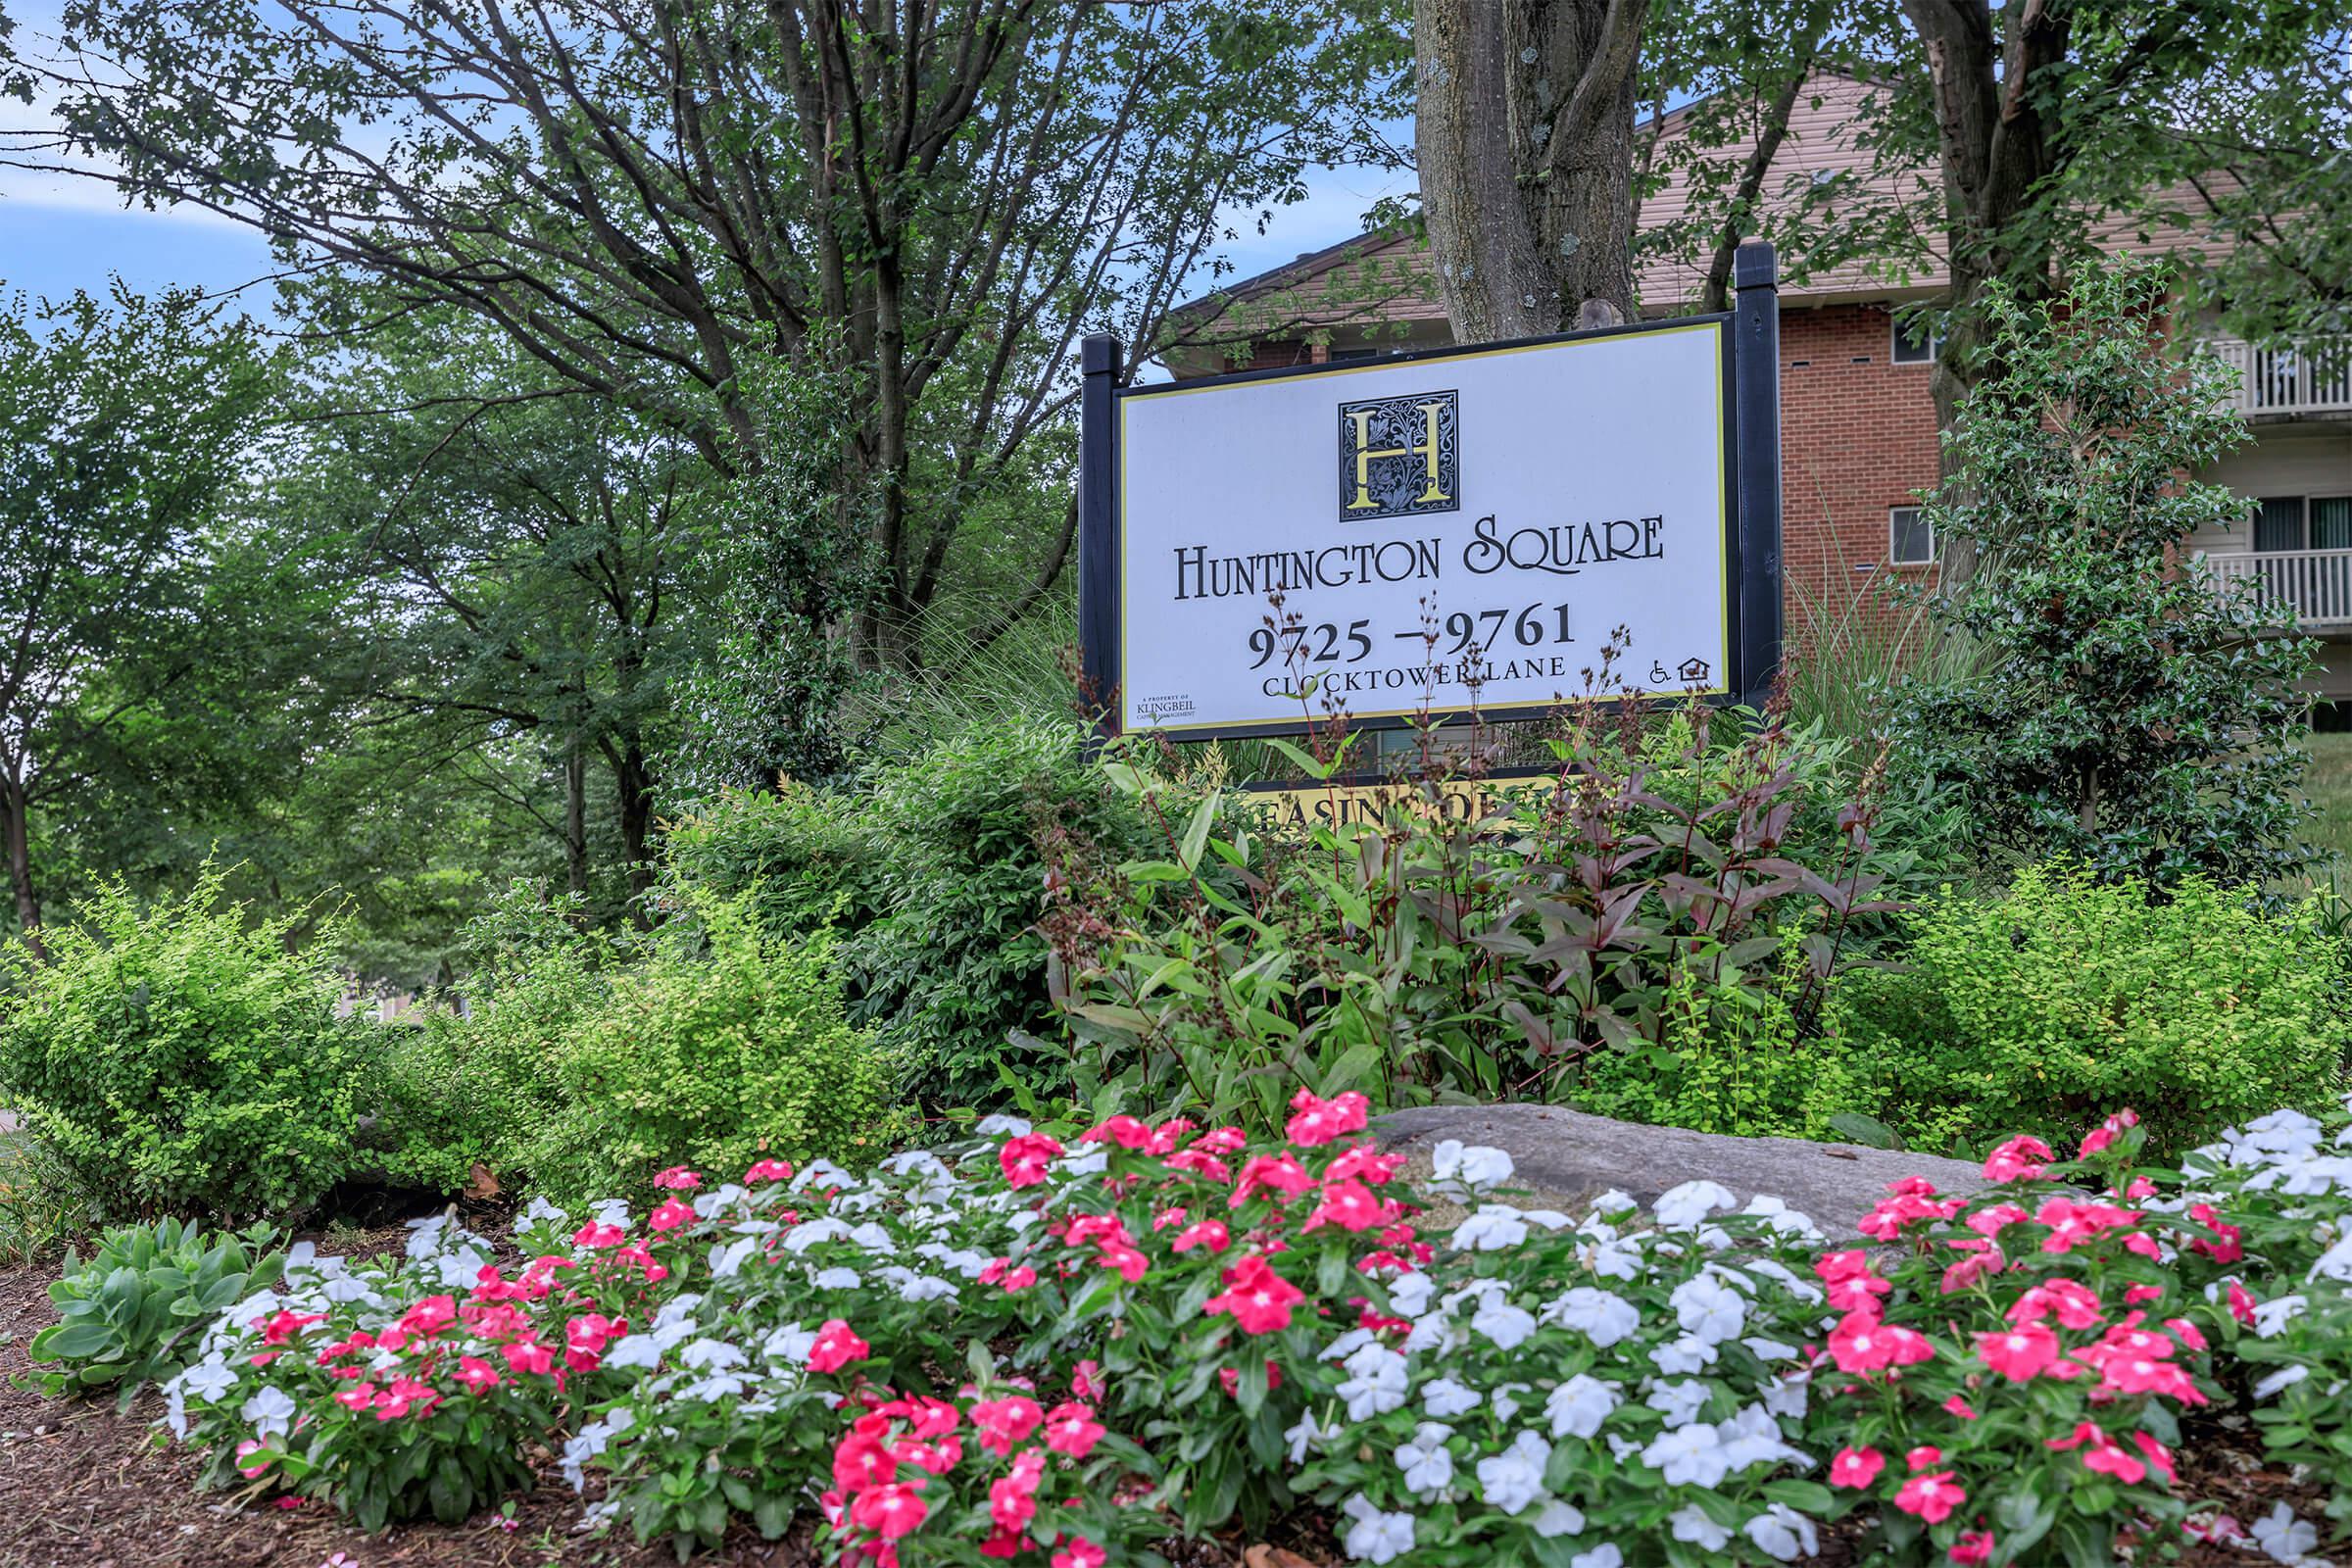 Landscaping at Huntington Square Apartments in Columbia, MD